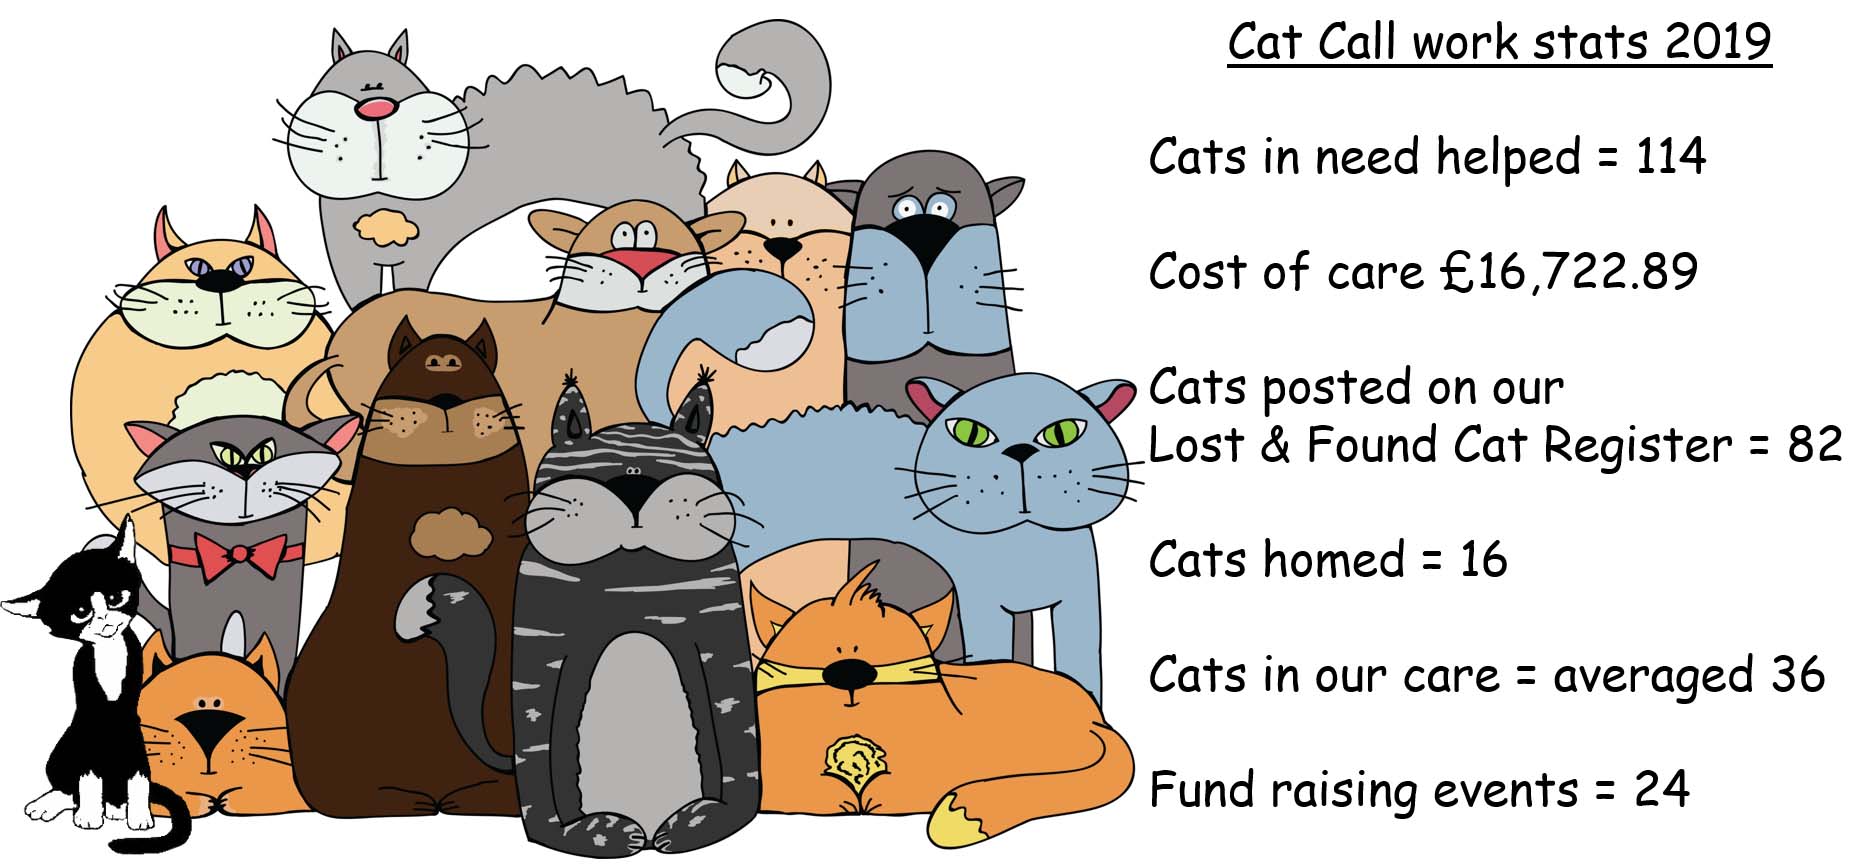 Cat Call Charity Work Stats 2019